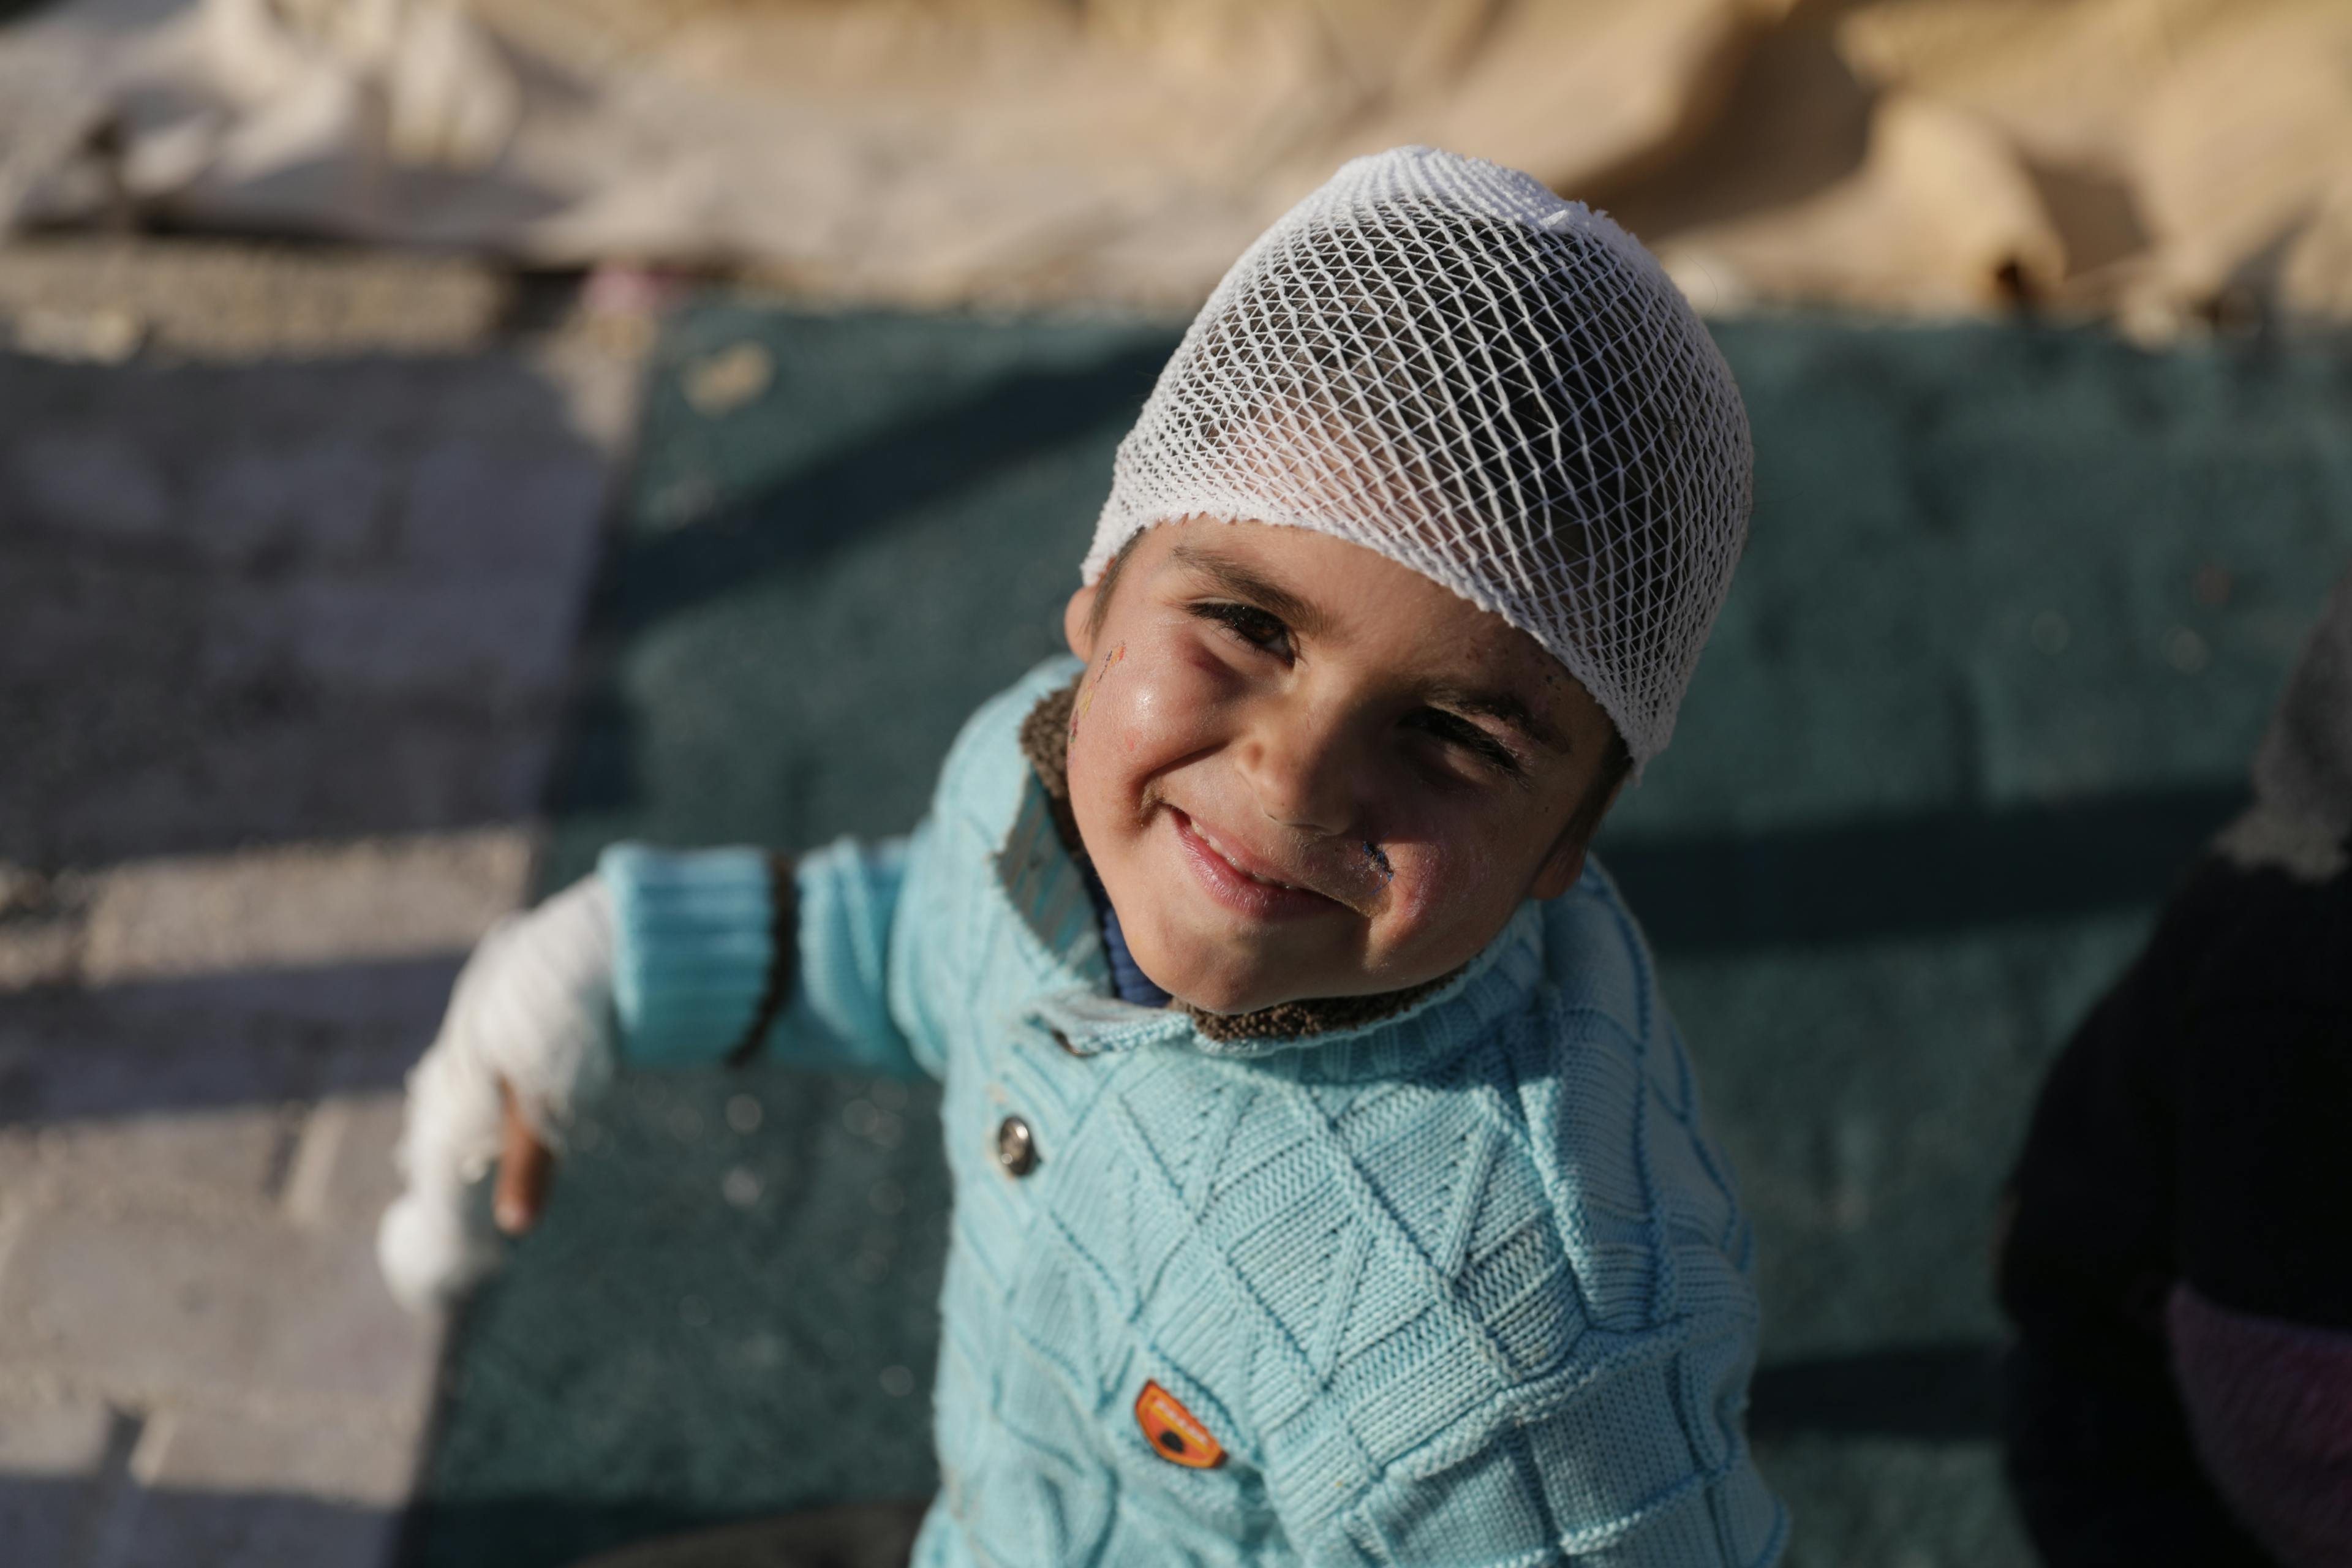 A young girl with a bandage on her head smiles at the camera